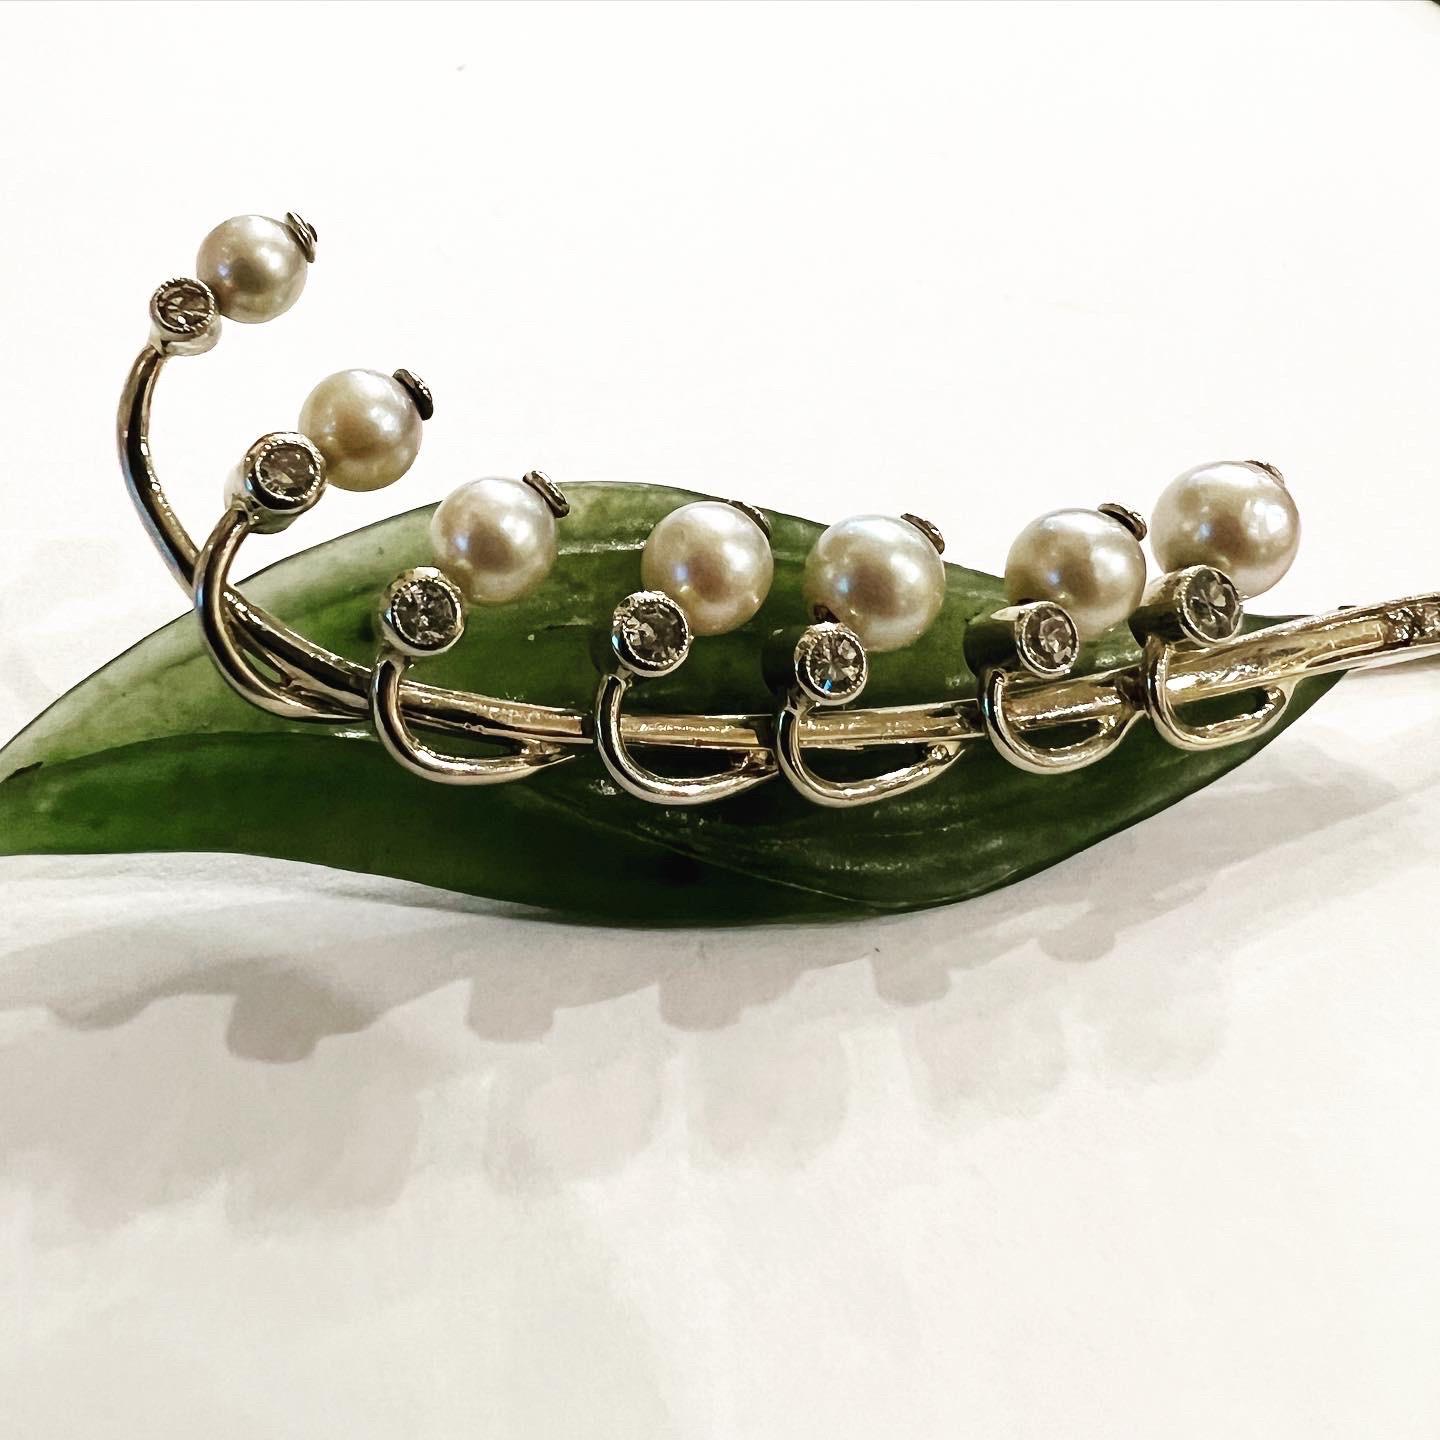 Artist 1950s Austrian Nephrite jade 14K Gold Diamonds Pearls Lily of the Valley Brooch For Sale